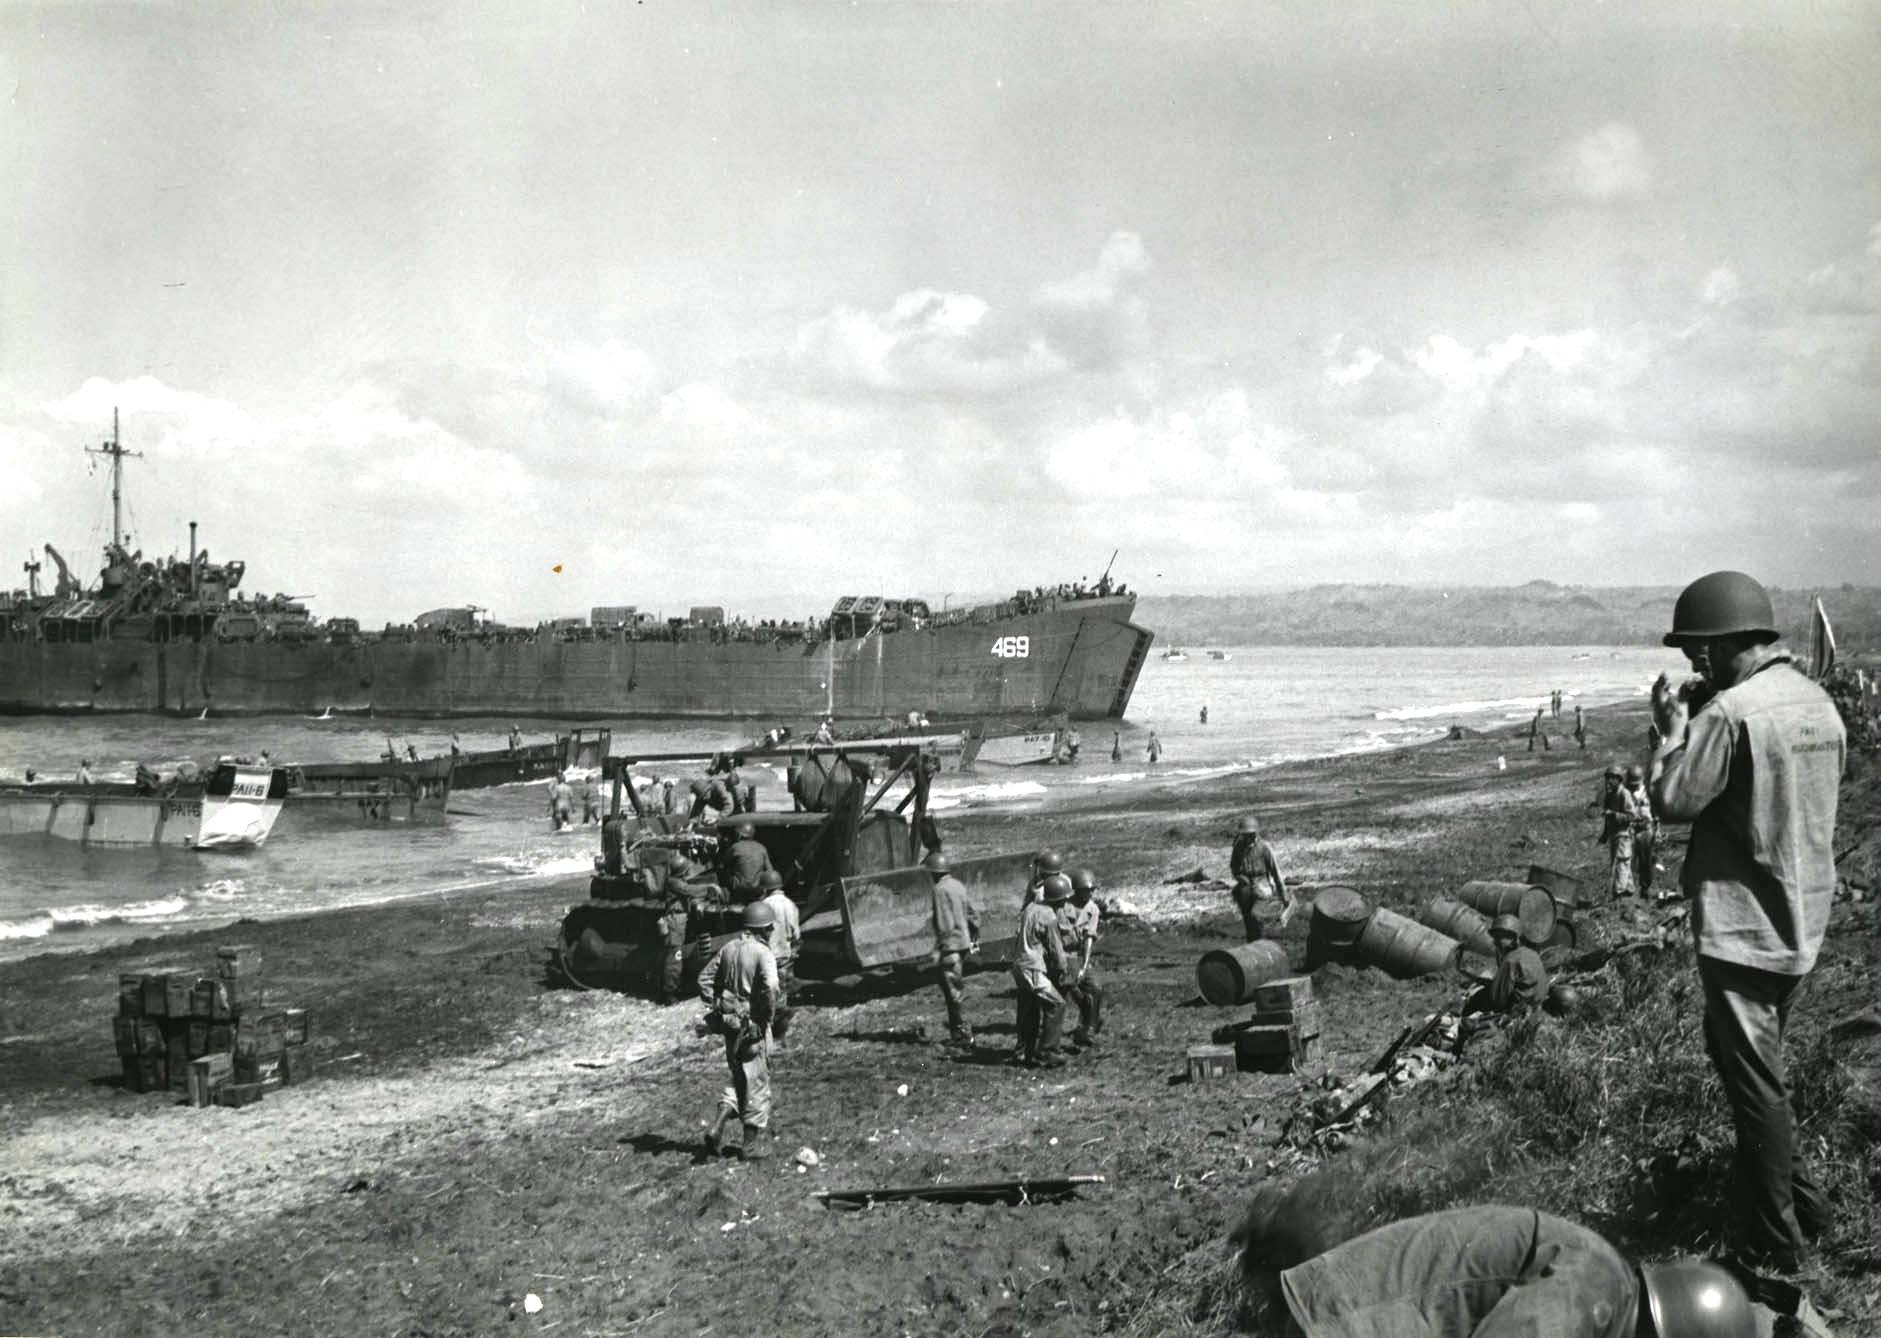 LSTs and LCVPs unloading men, equipment, and provisions on White Beach Two in Lingayen Gulf, Luzon, Philippine Islands, 9 Jan 1945.